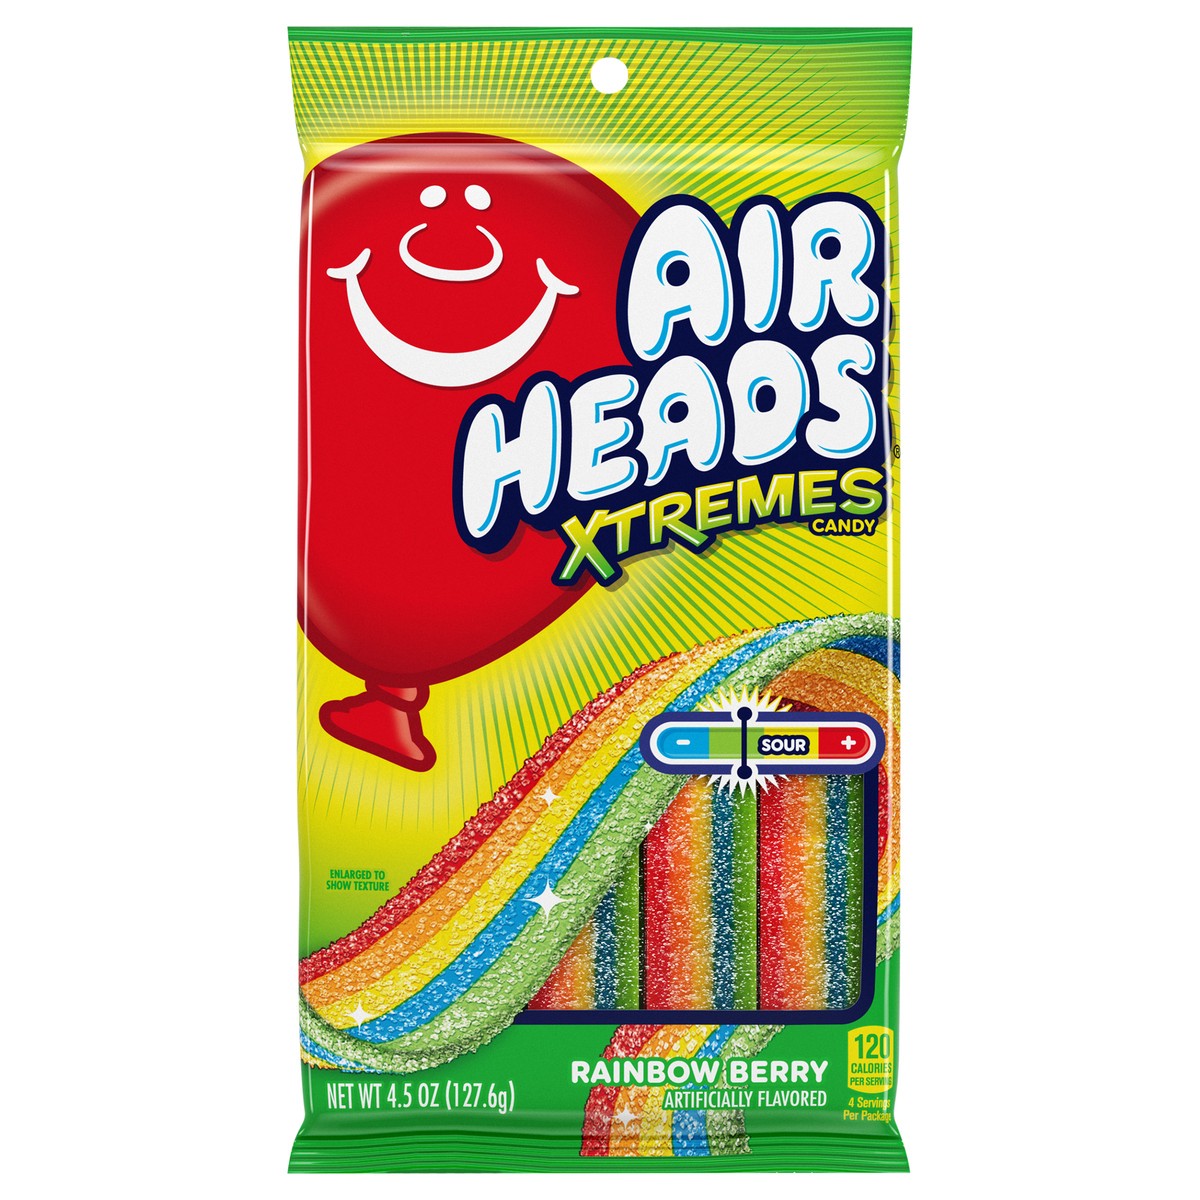 slide 1 of 3, Airheads Xtremes Sweetly Sour Candy Belts Peg Bag, Rainbow Berry flavor, 4.5 Ounce, 4.5 oz